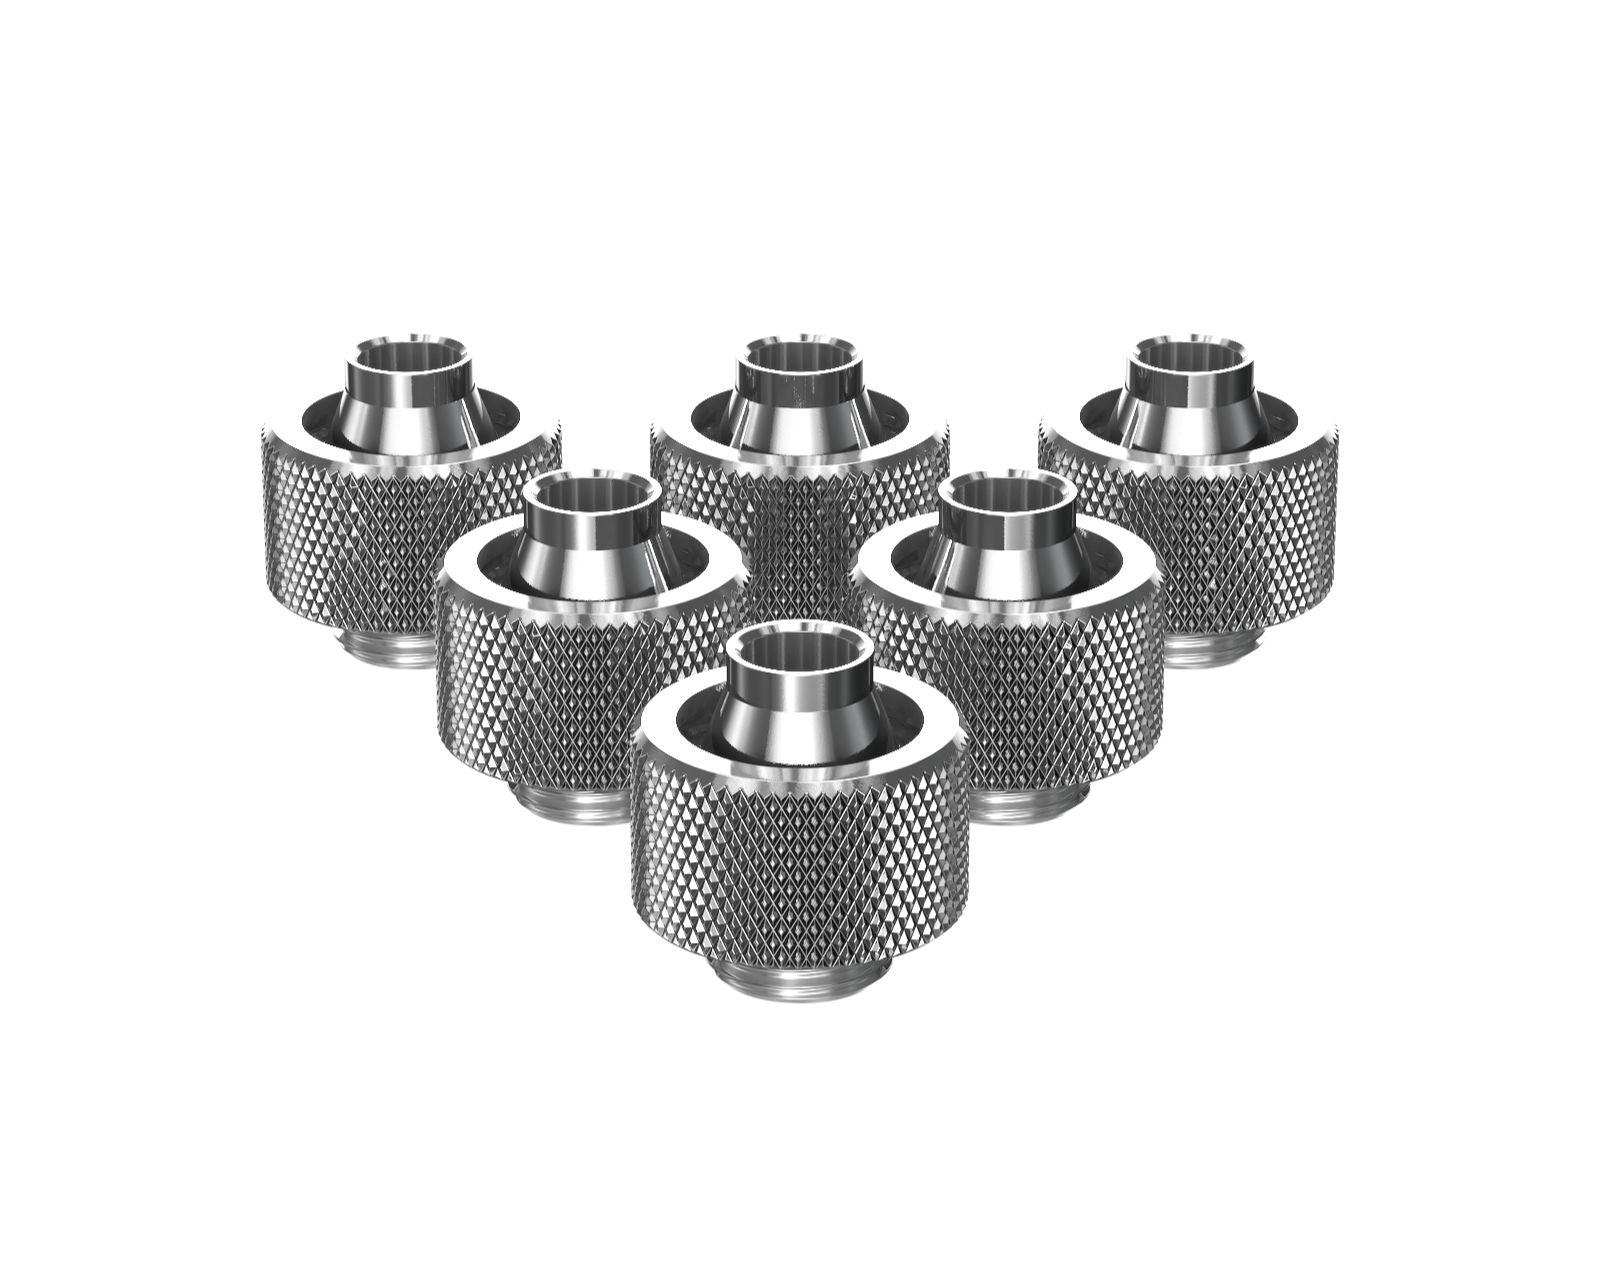 PrimoChill SecureFit SX - Premium Compression Fitting For 7/16in ID x 5/8in OD Flexible Tubing 6 Pack (F-SFSX758-6) - Available in 20+ Colors, Custom Watercooling Loop Ready - Silver Nickel